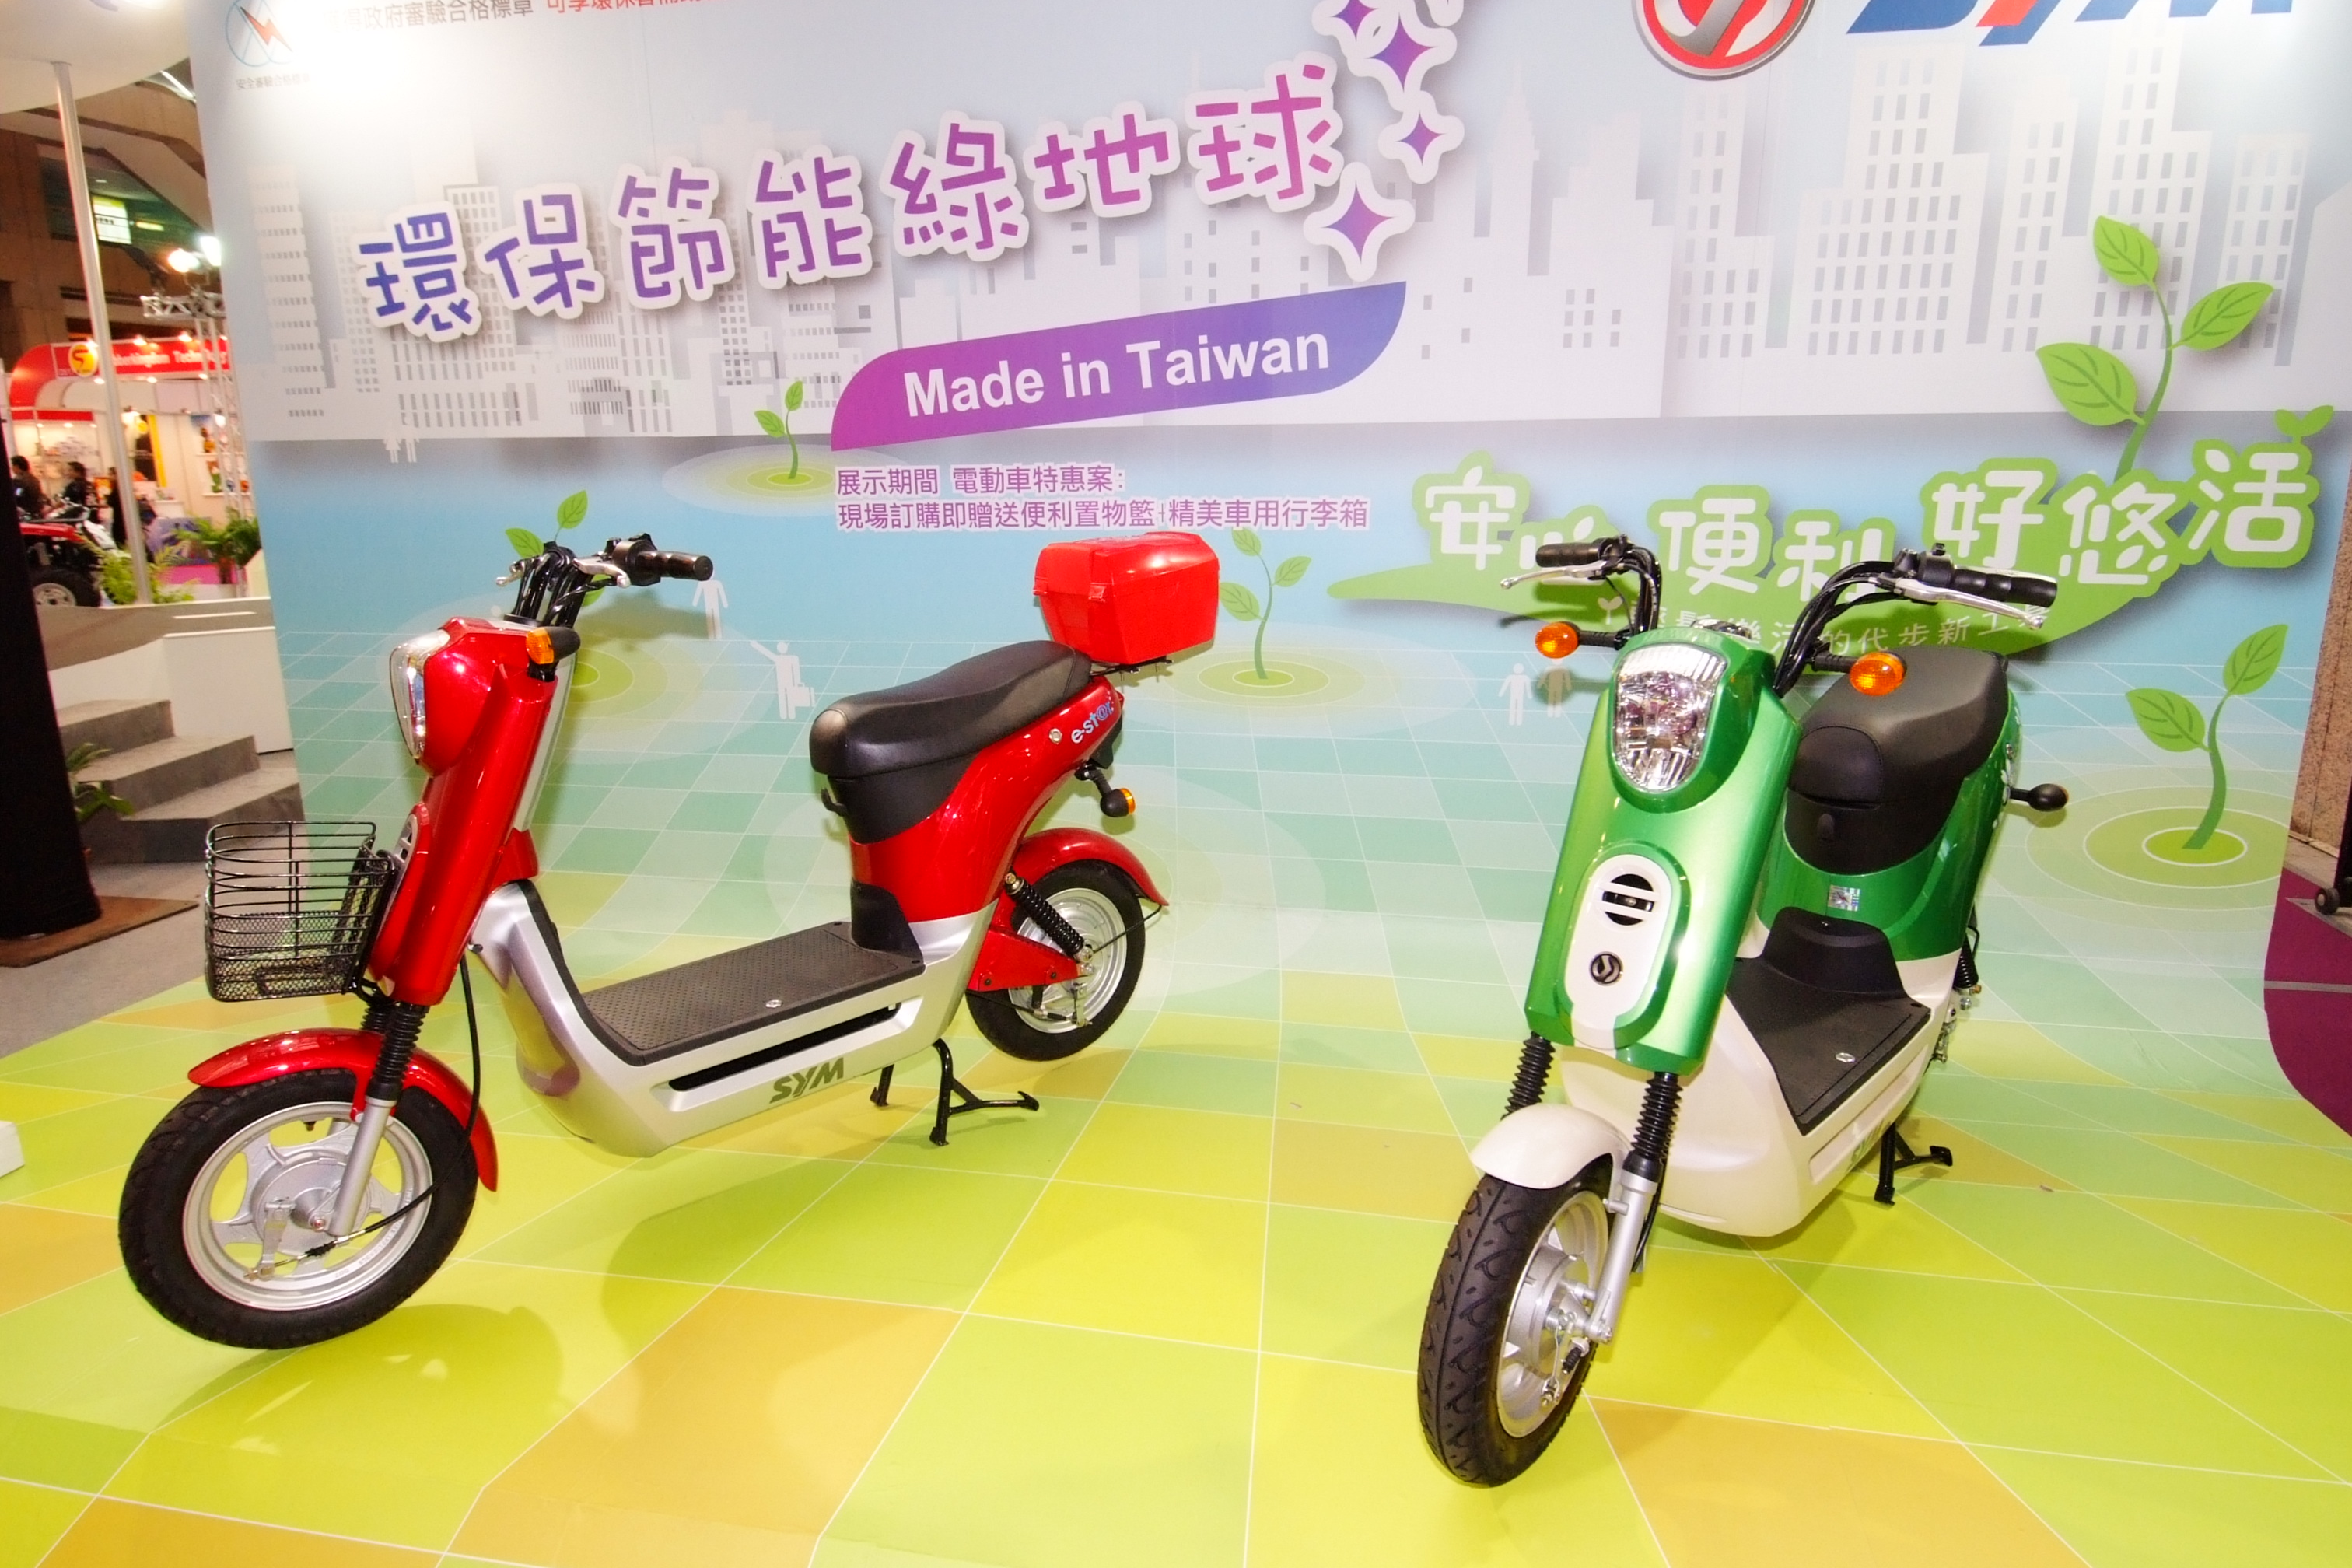 Good quality, reasonably priced made-in-Taiwan products are the key offerings at the annual Motorcycle Taiwan.